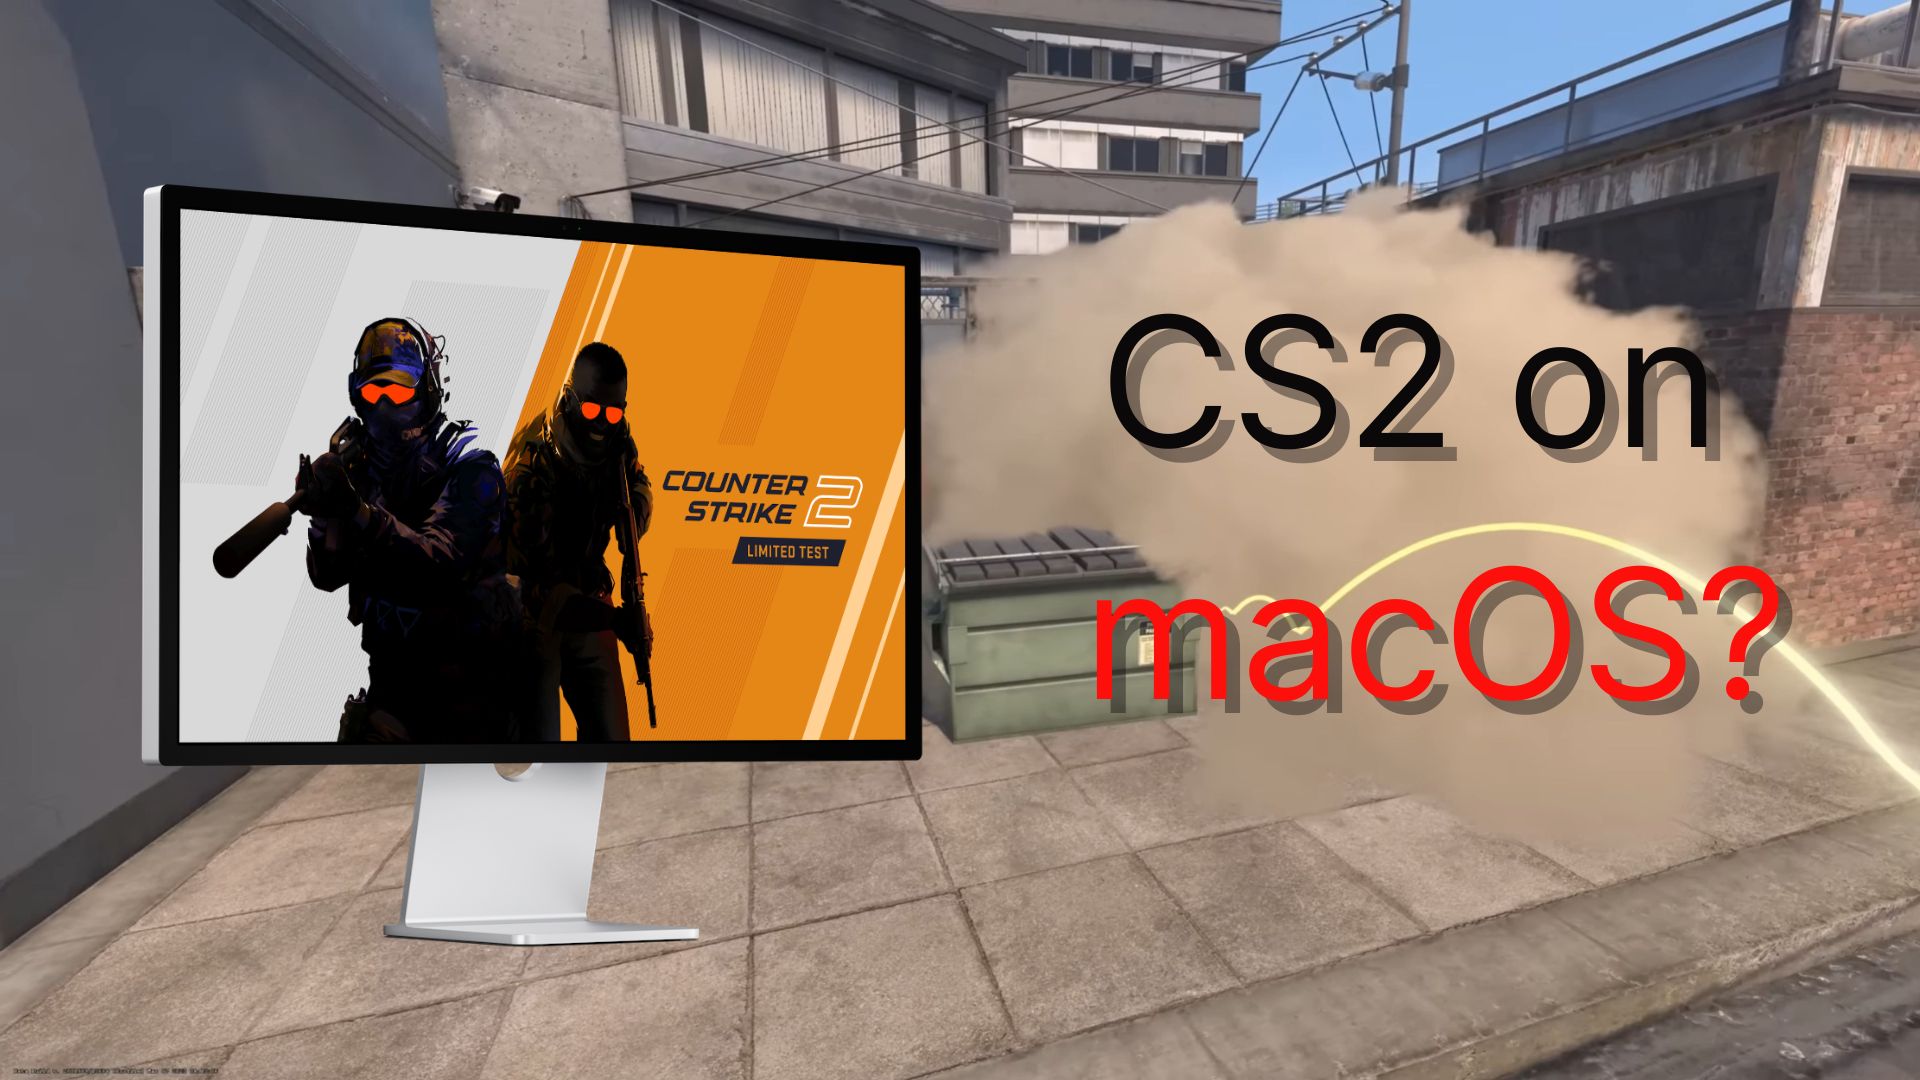 Counter-Strike 2 May Be on the Way